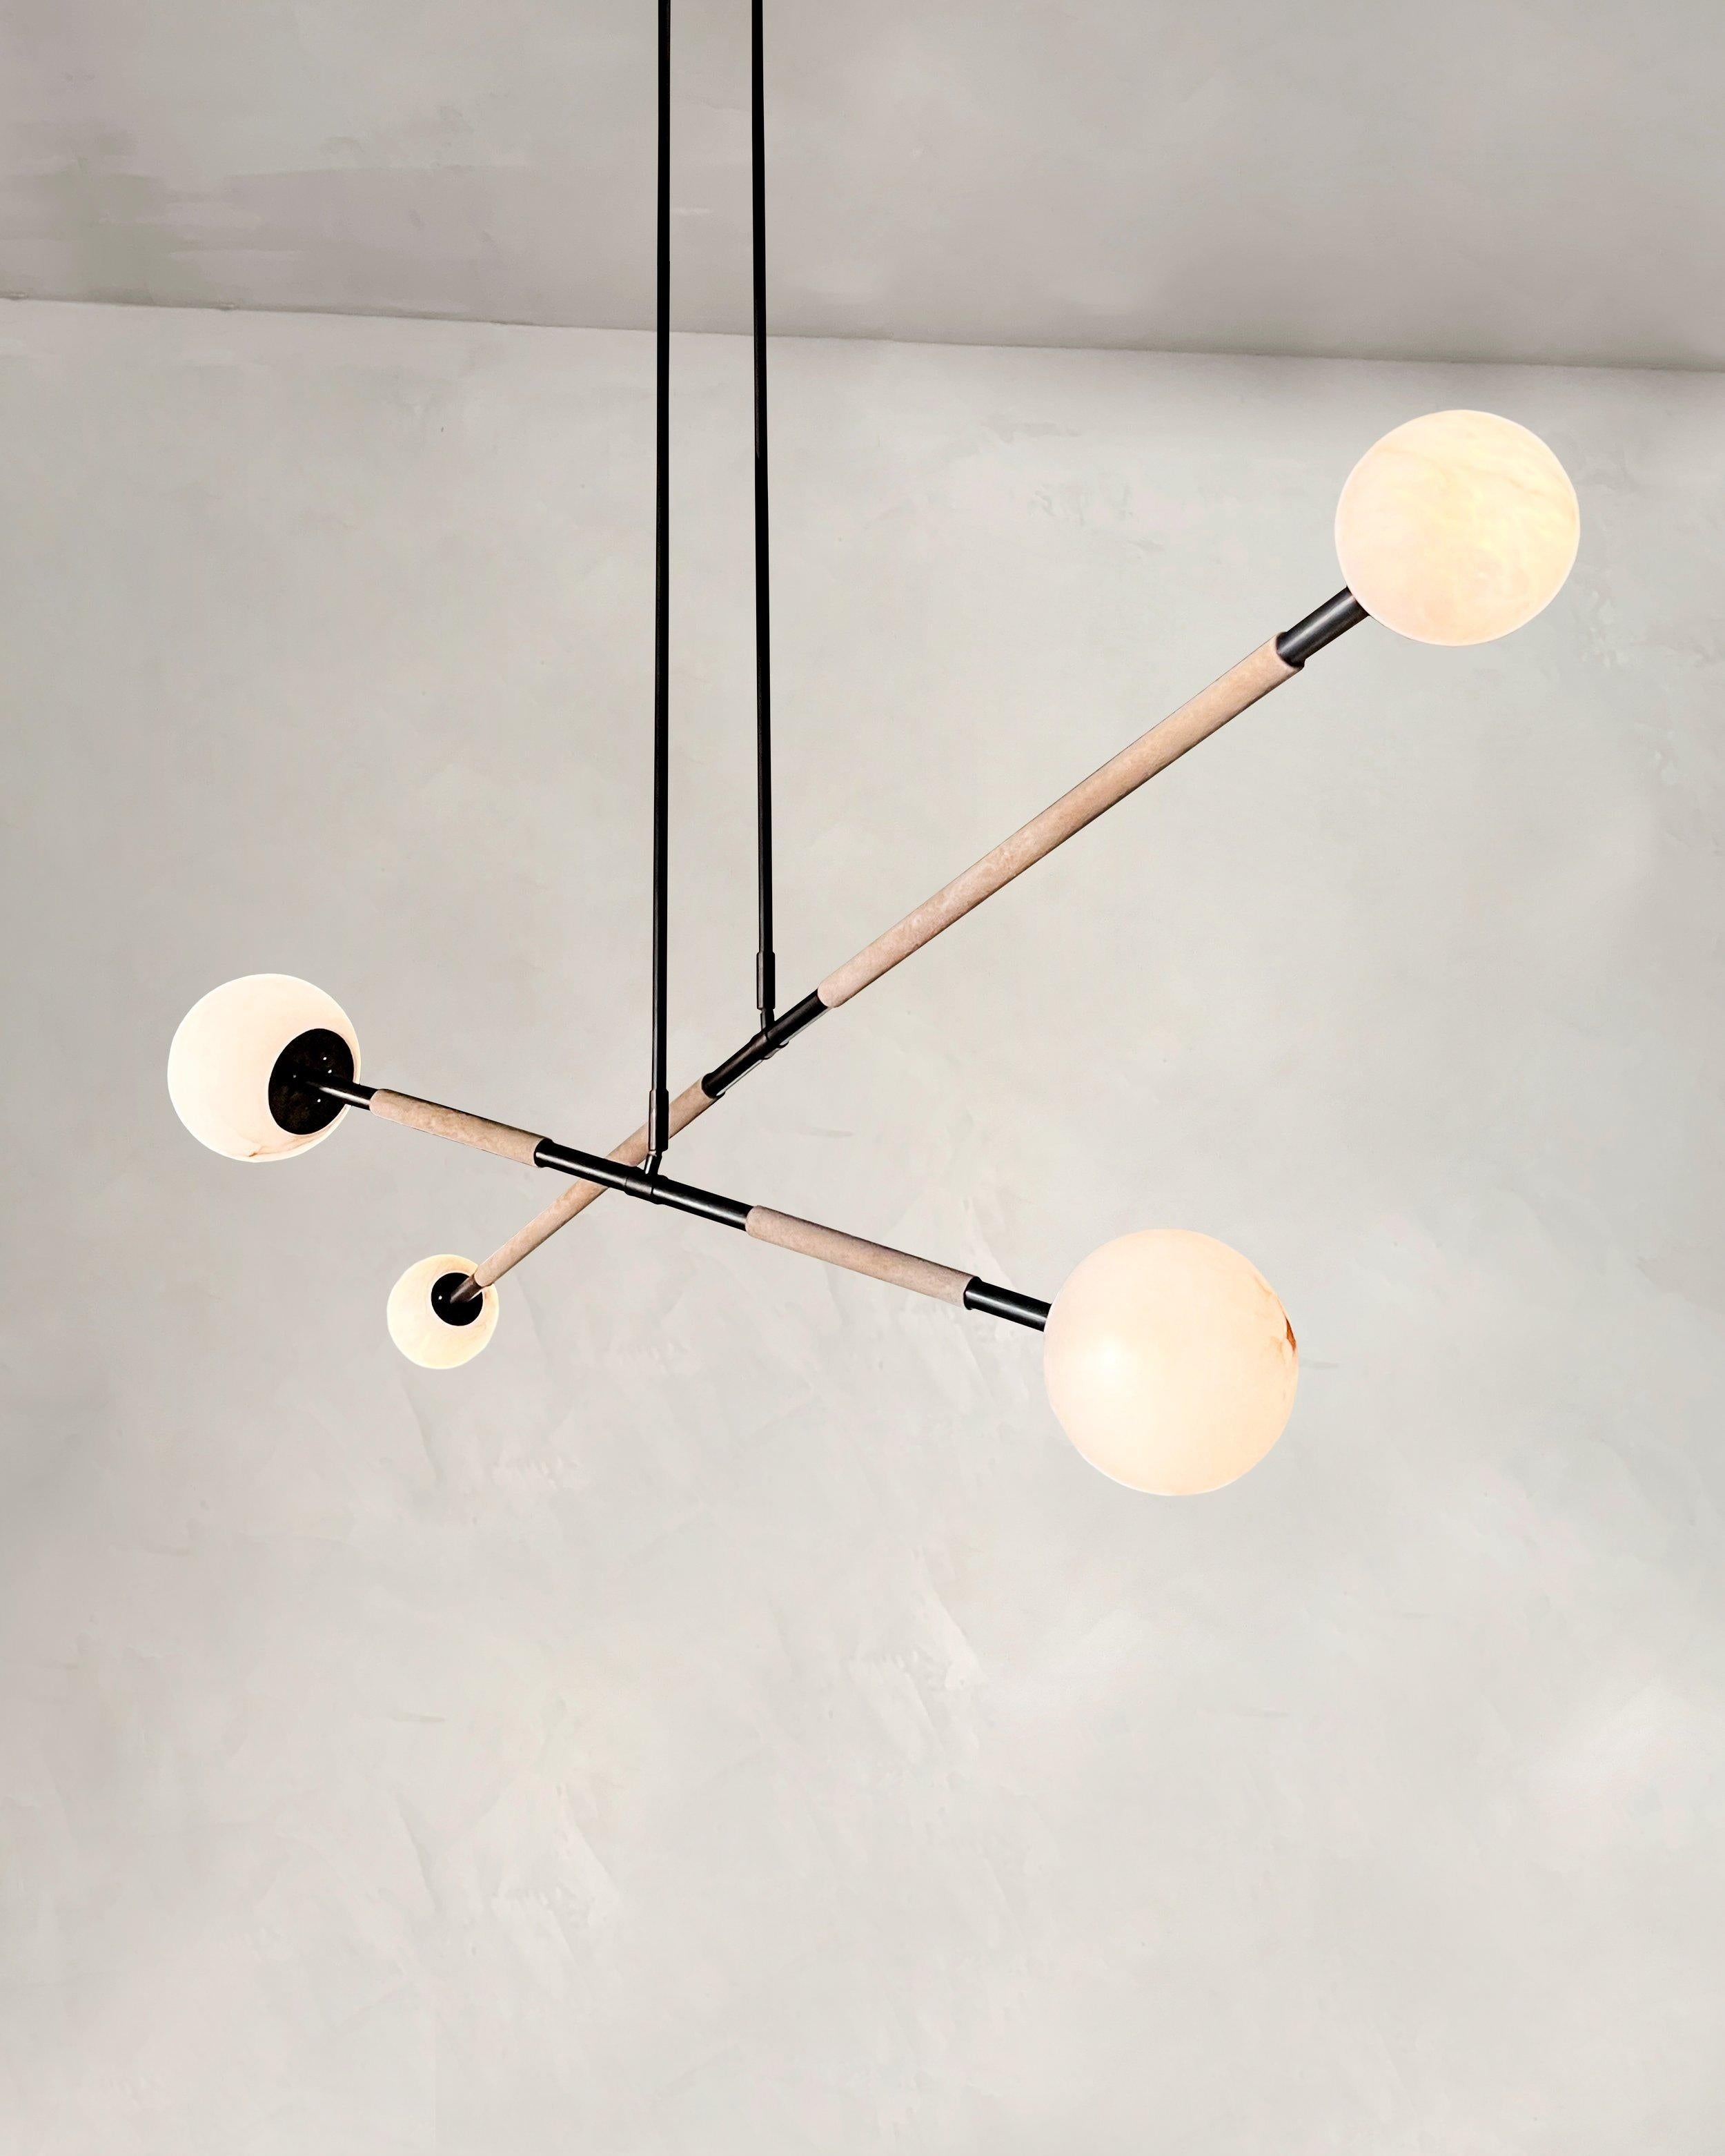 Leather and Alabaster Mobile Chandelier by Contain
Dimensions: D 185 x W 185 x H 300 cm (custom length).
Materials: Alabaster, brass and leather.

Brass structure, leather and brass. Also available without leather. Dimensions are customizable.